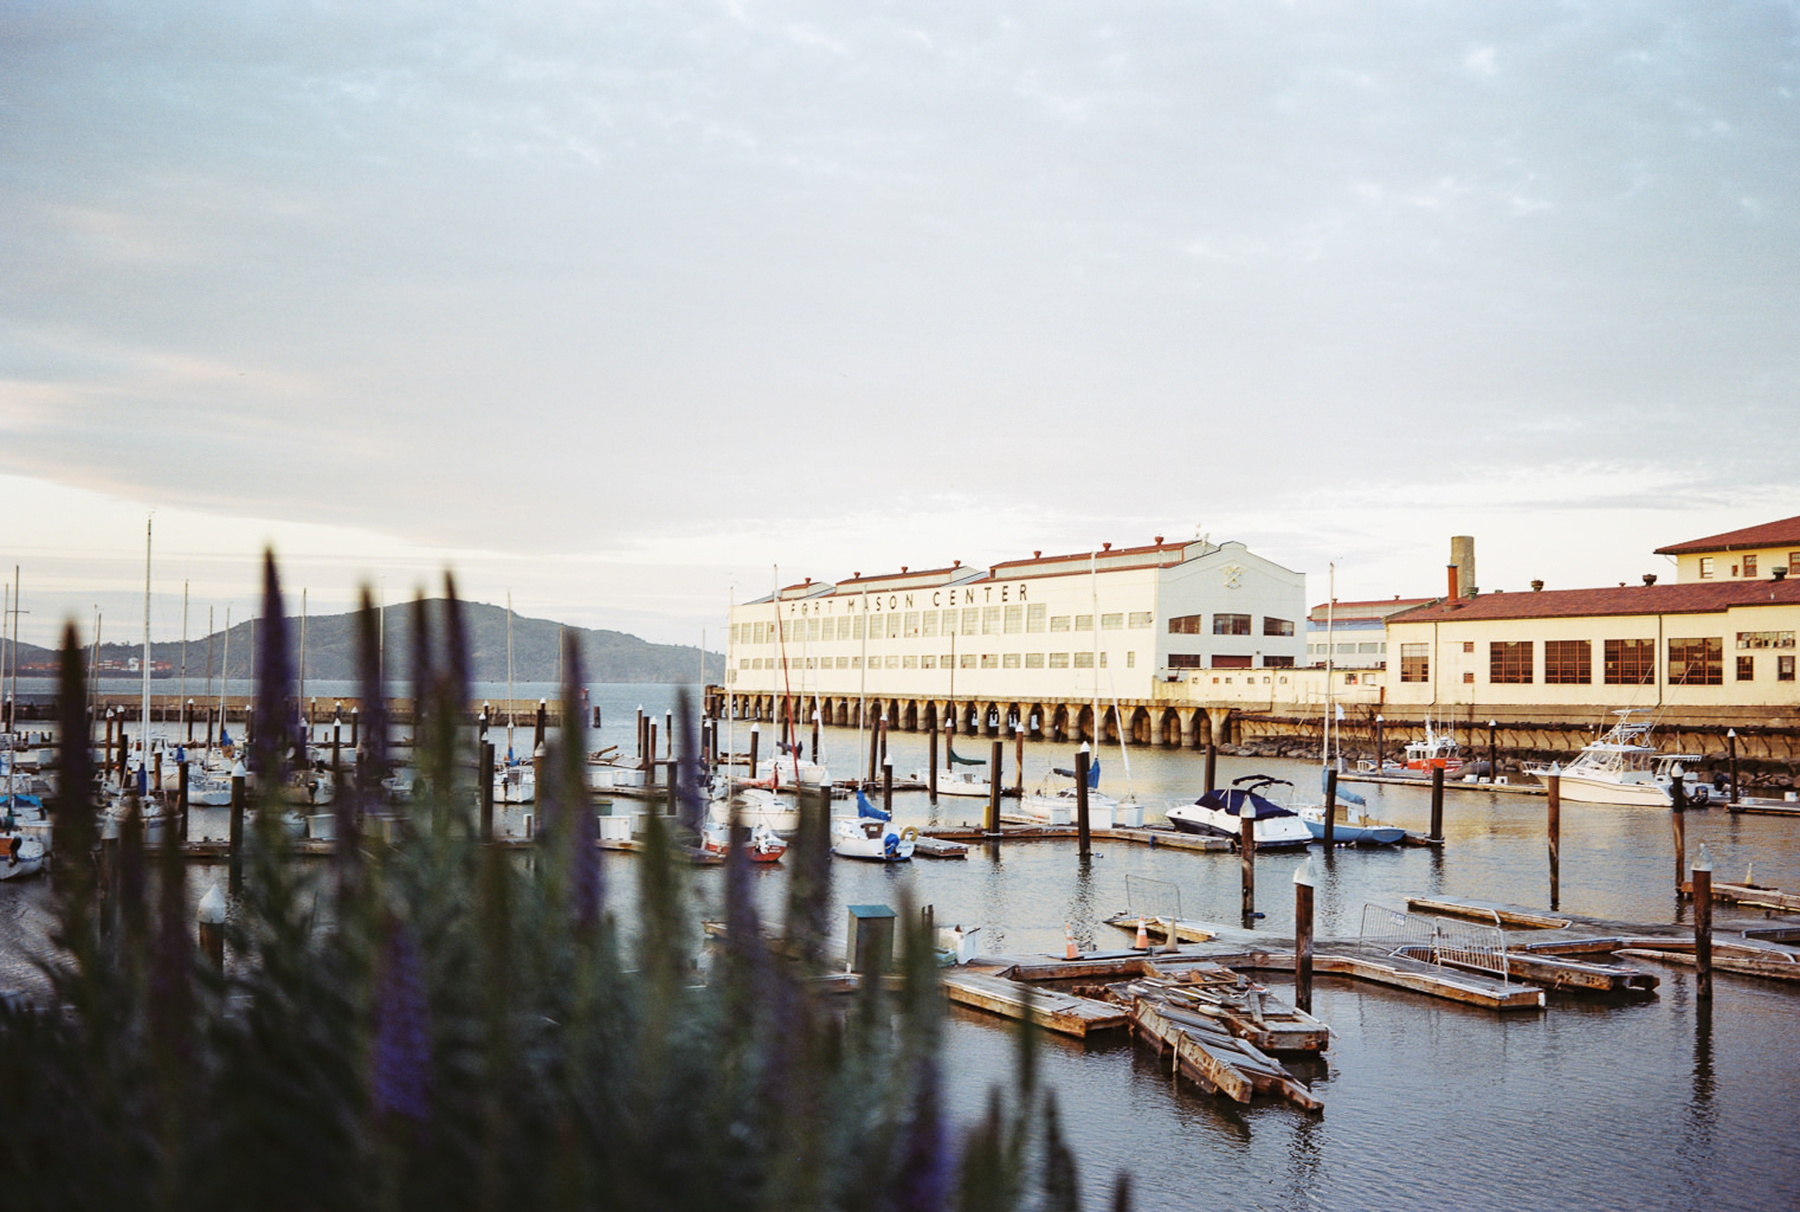 a scan of a medium format film photograph of Fort Mason and some boats from behind some plants